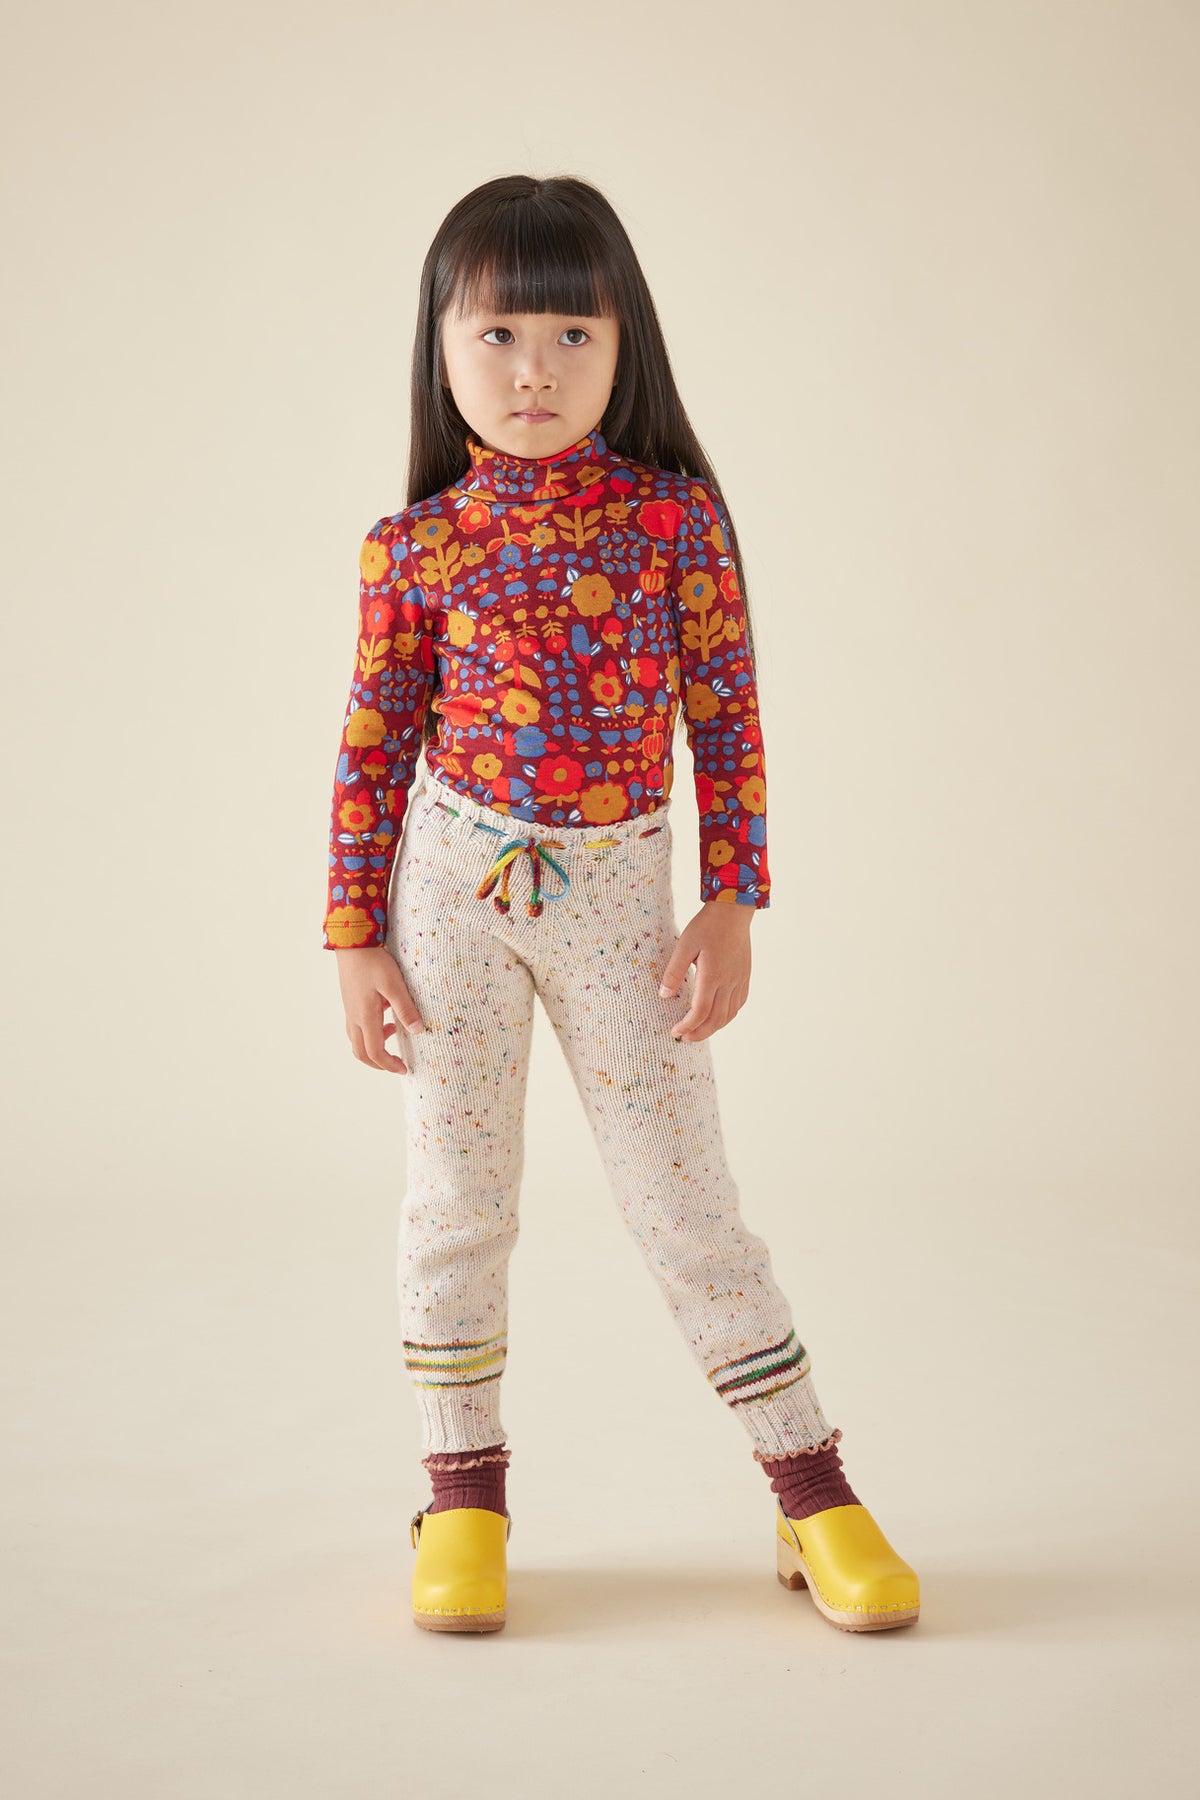 Snowy Day Leggings - Stained Glass Confetti+Model is 43 inches tall, 38lbs, wearing a size 4-5y